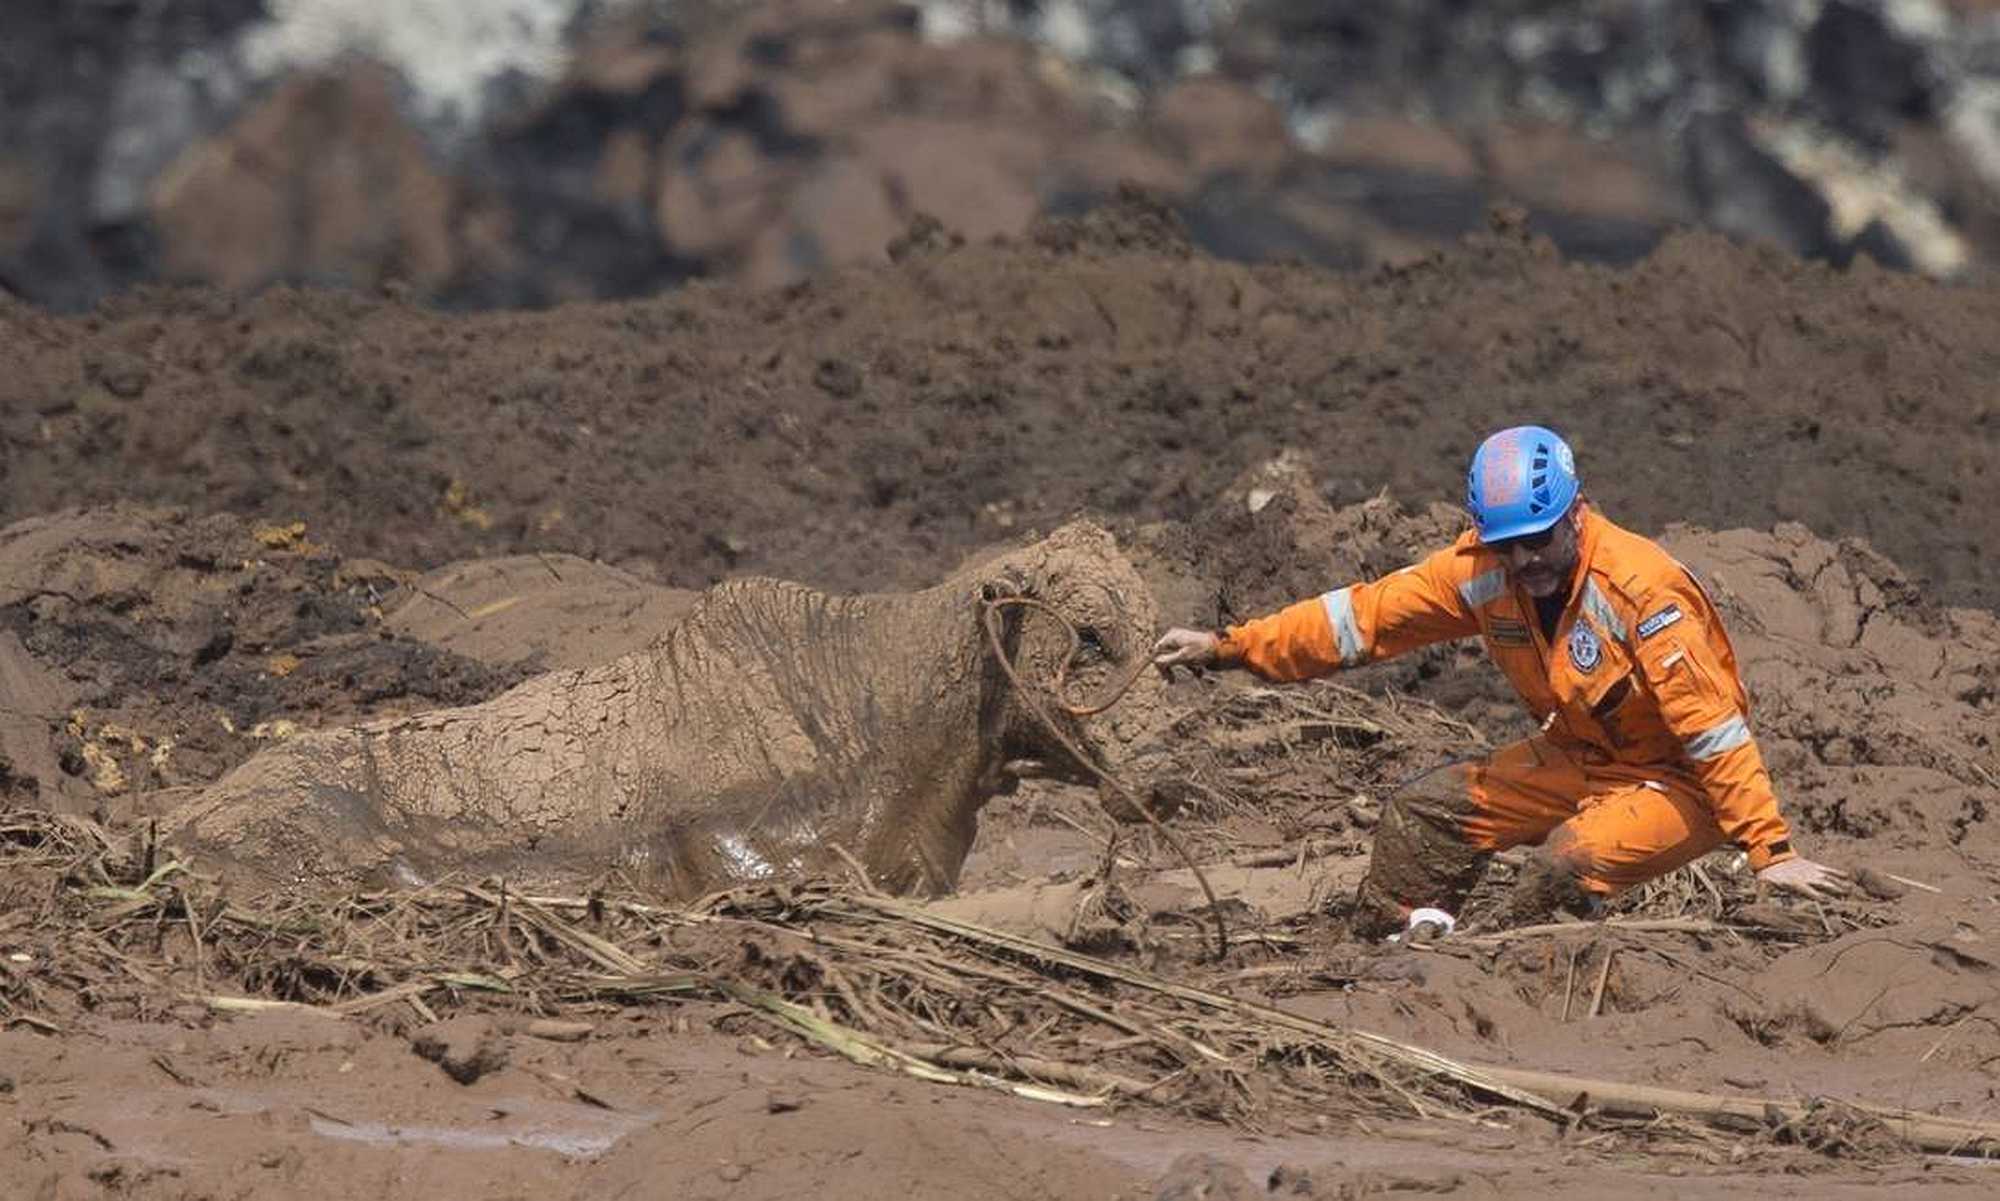 Voluntary firefighter tries to rescue cow entrapped in the mud in Brumadinho